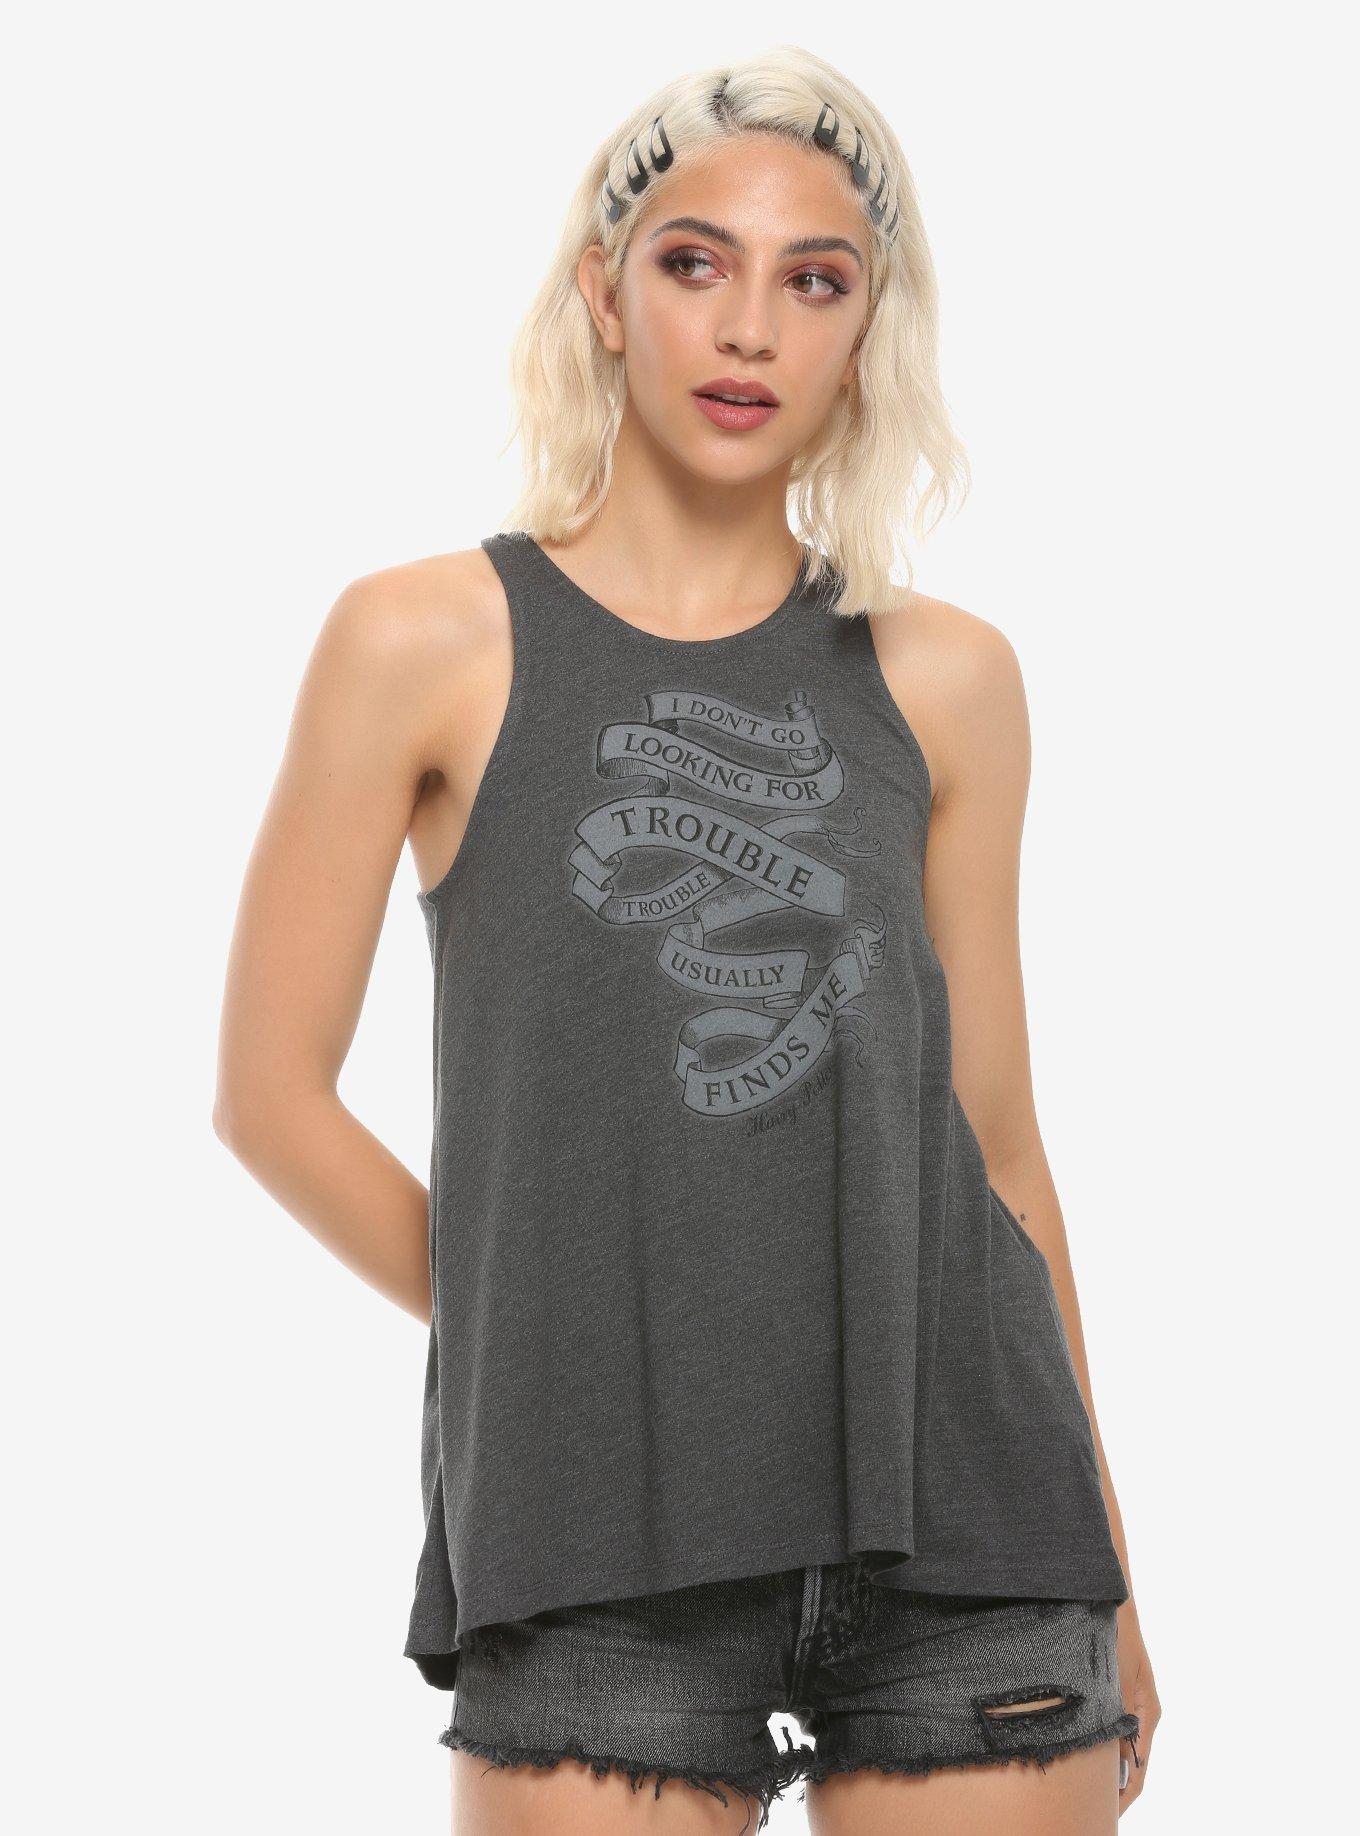 Harry Potter I Don't Go Looking For Trouble Girls Tank Top | Hot Topic